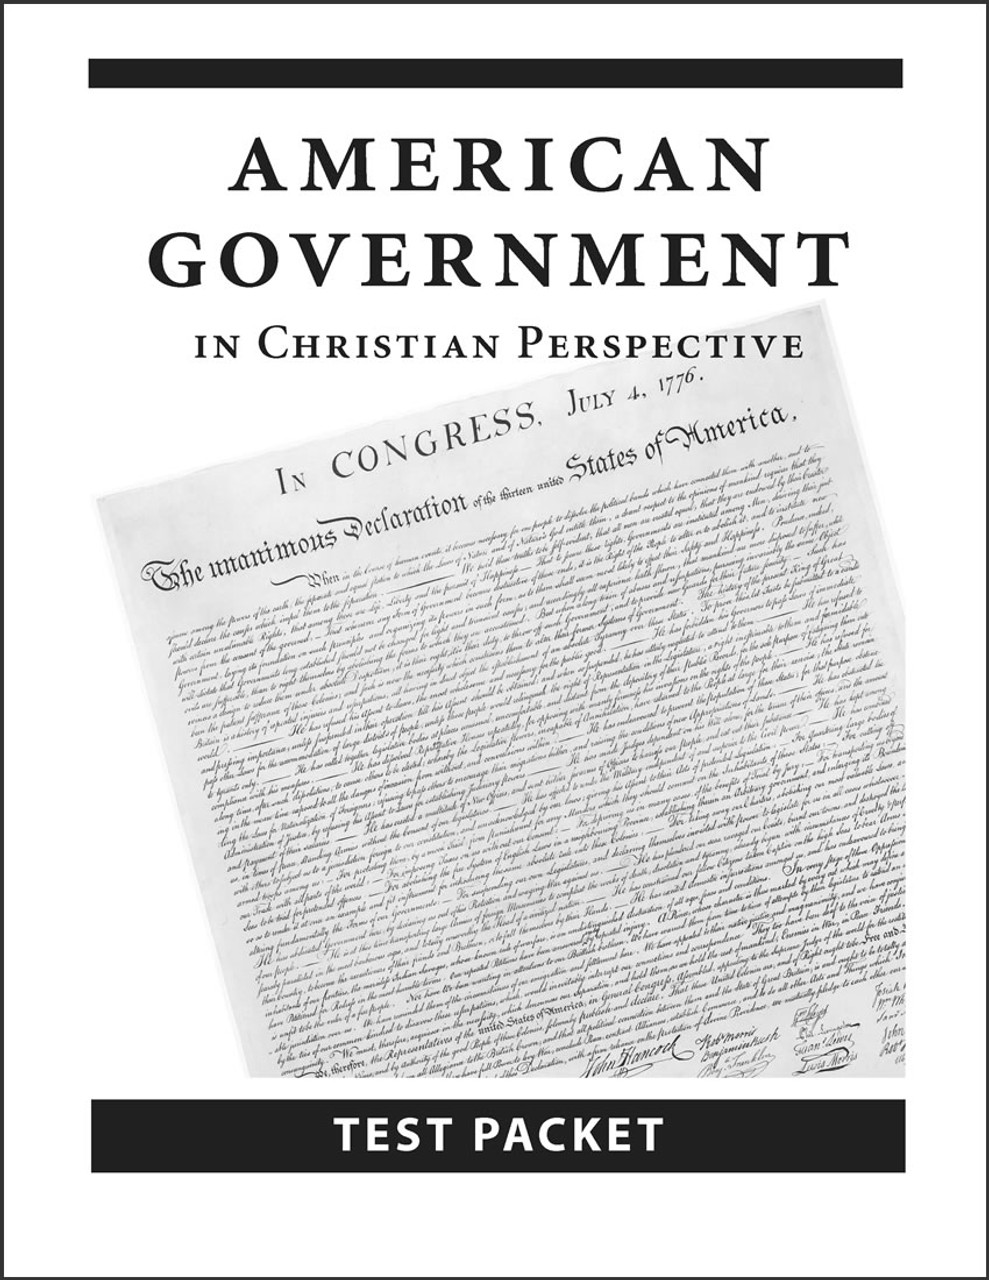 American Government in Christian Perspective, 3rd edition - Test Packet